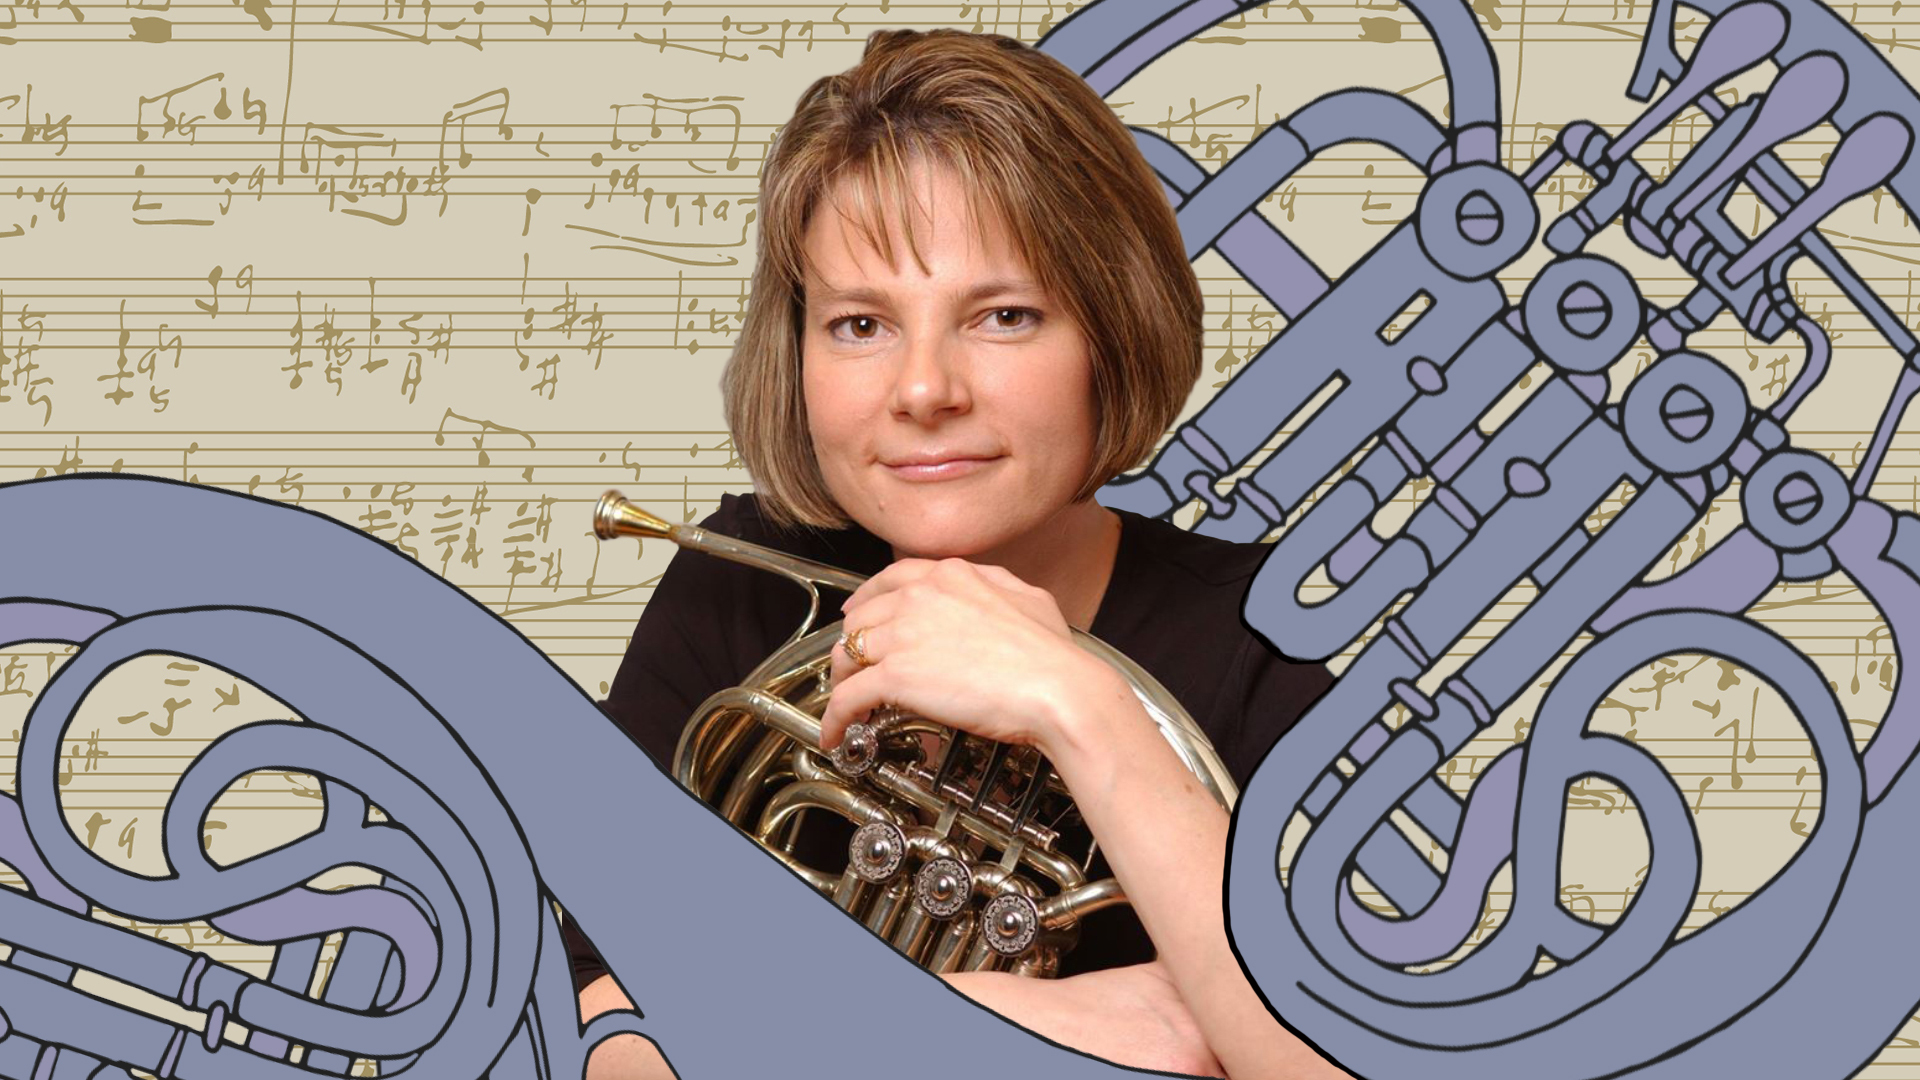 Kristy Morrell with design of french horn and sheet music